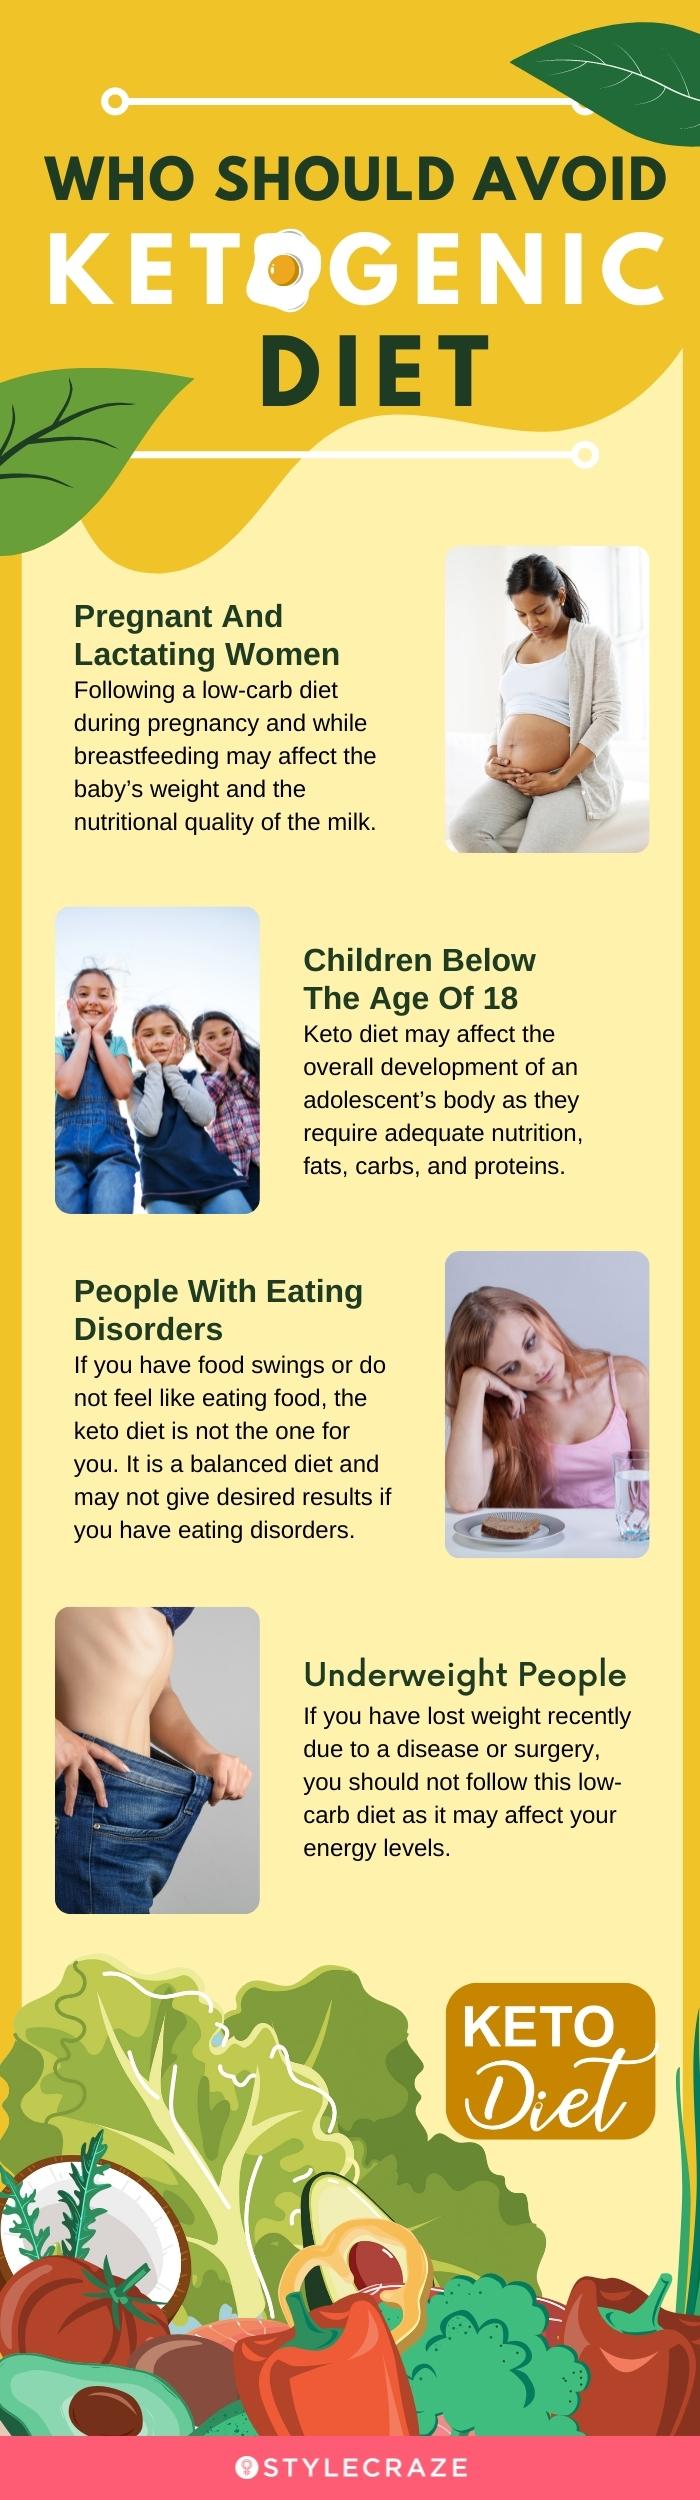 who should avoid ketogenic diet [infographic]